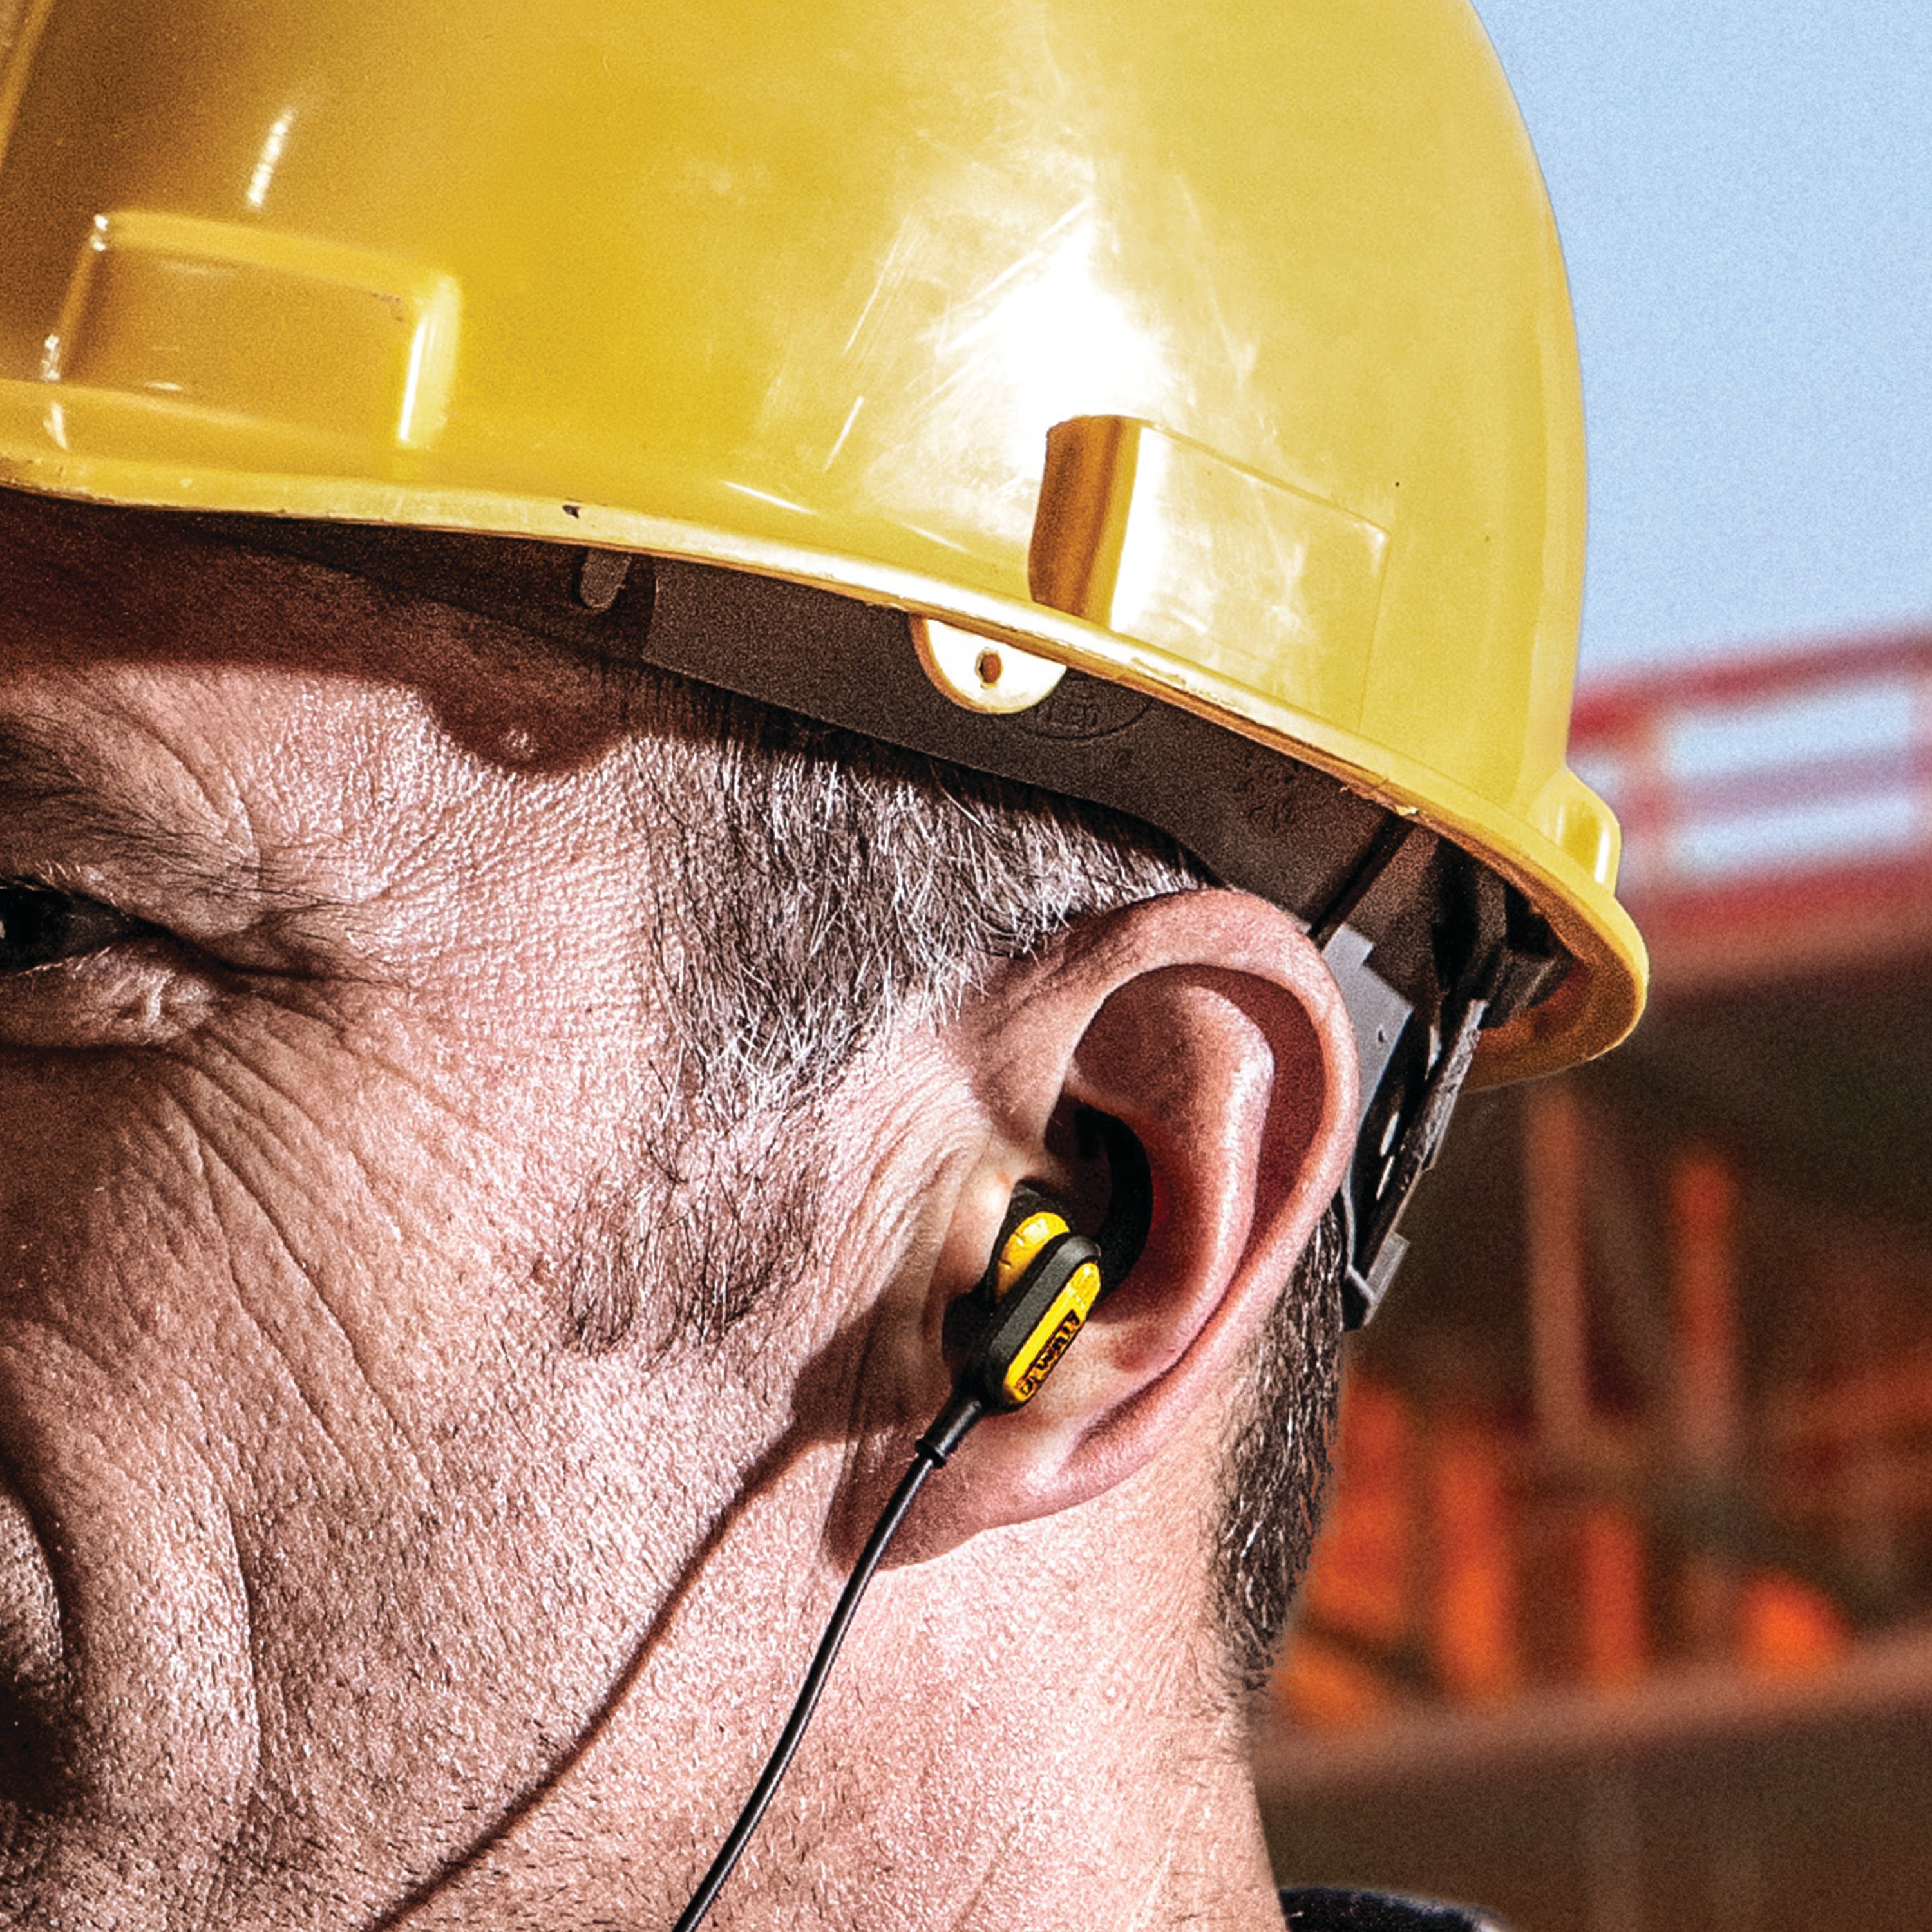 Jobsite Earphones for Lightning being used by a person.